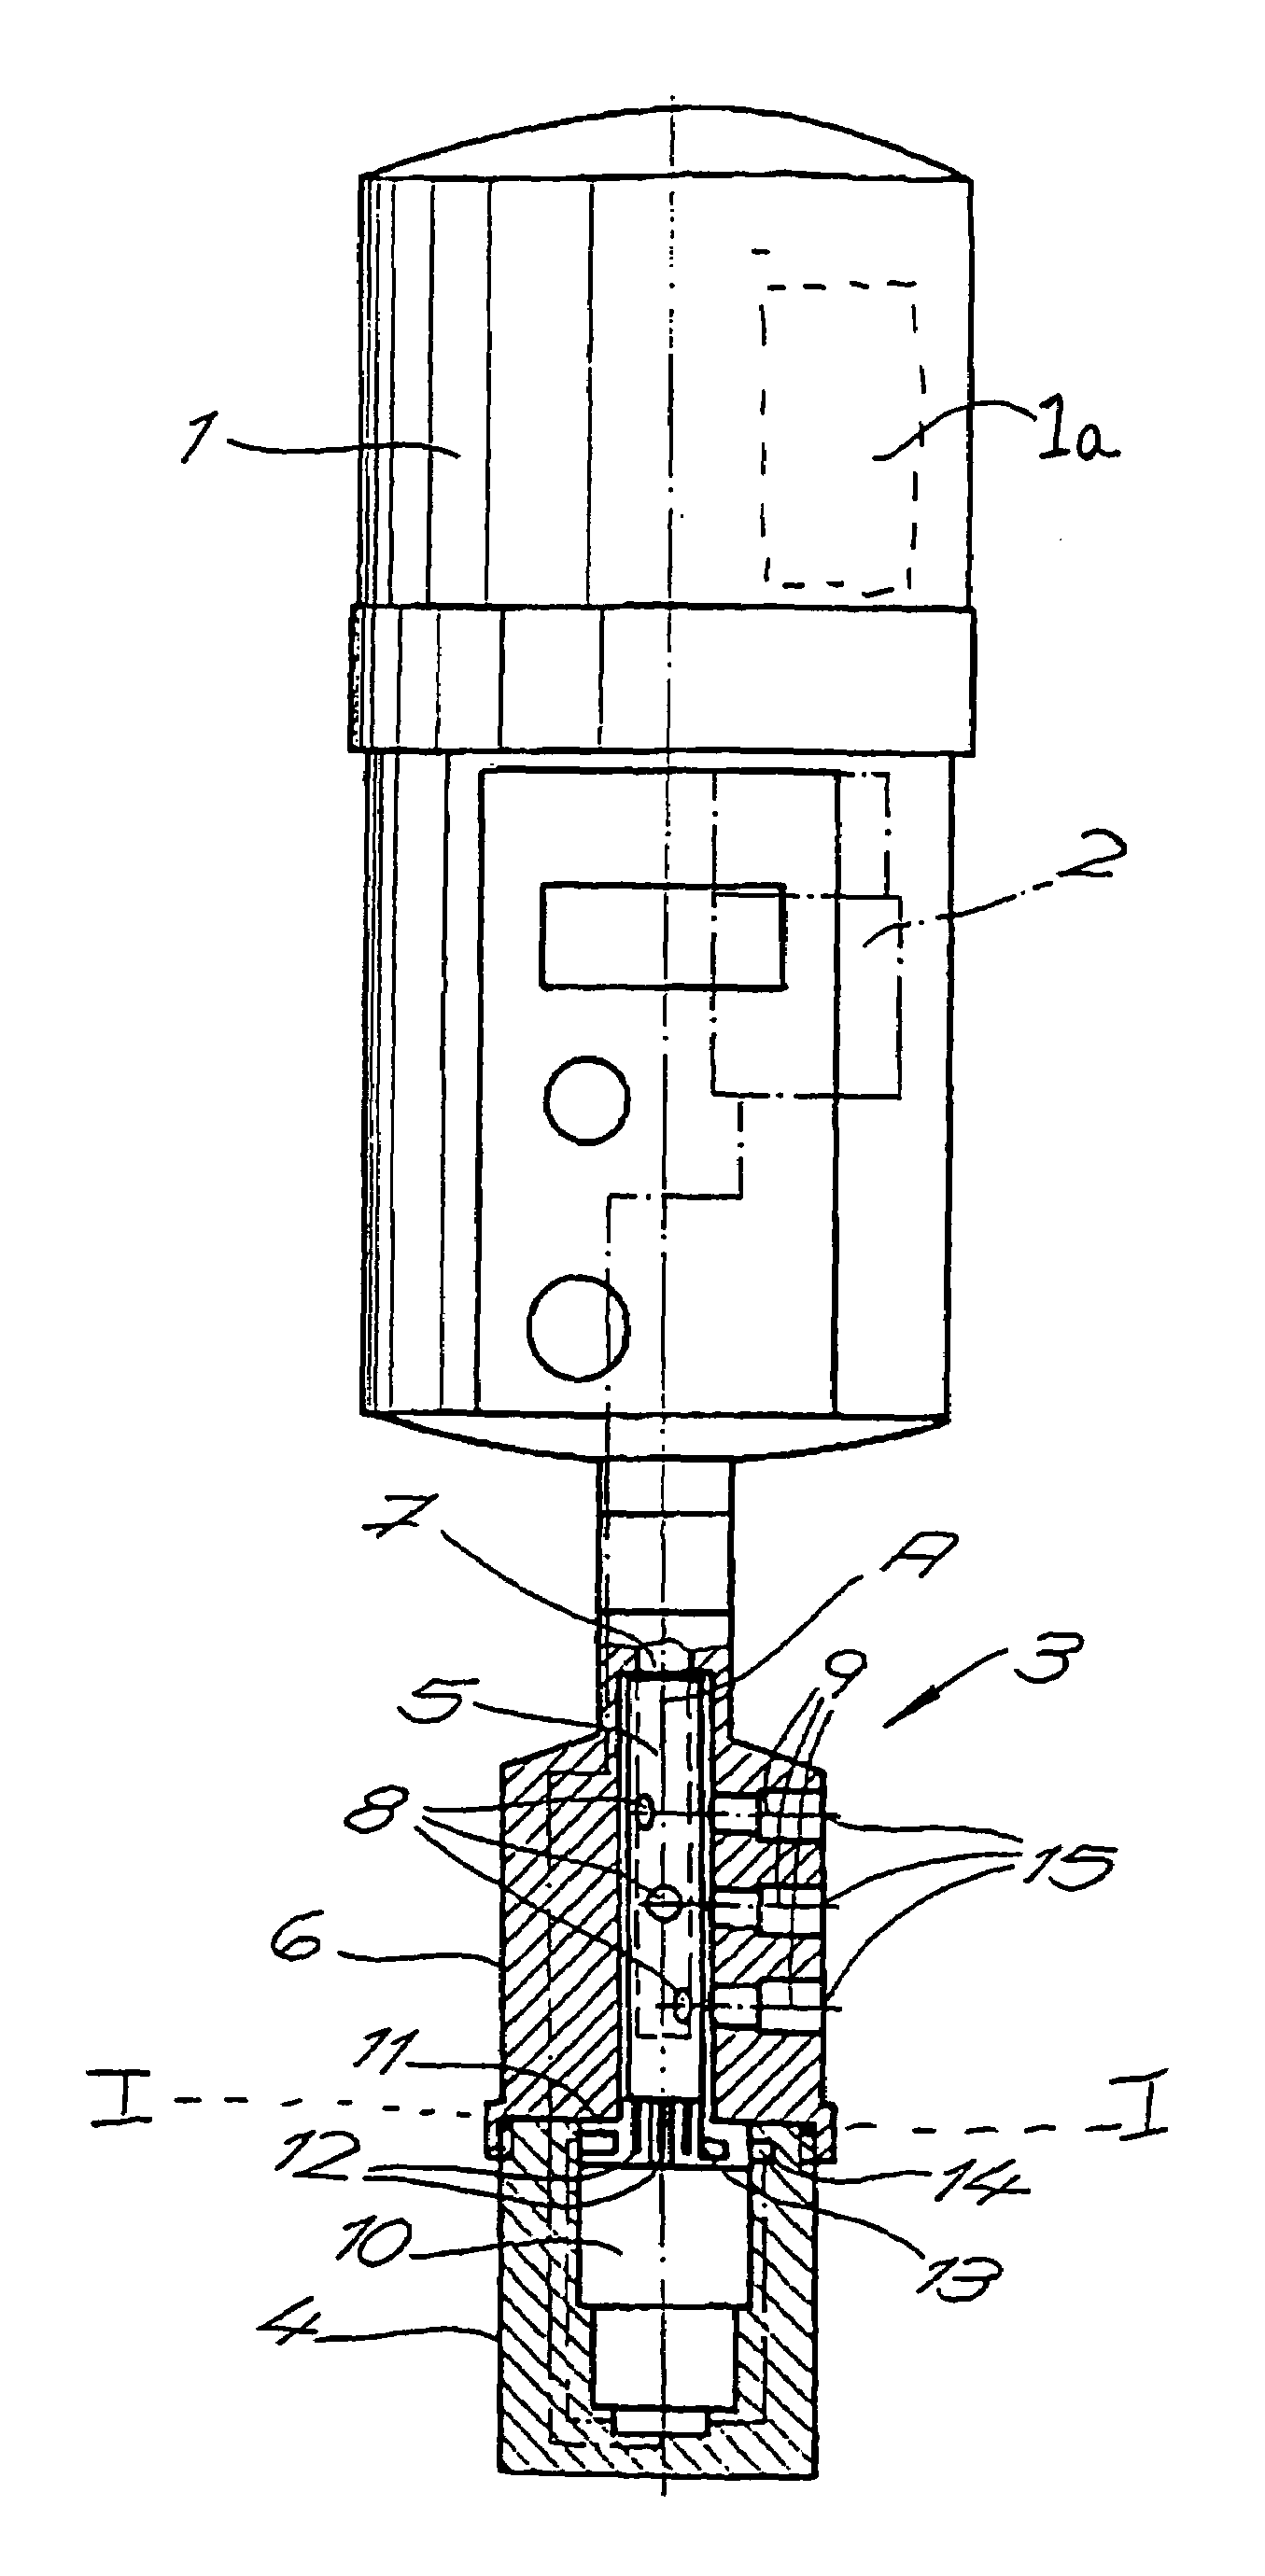 Device for supplying lubricant to several lubrication points on machine parts